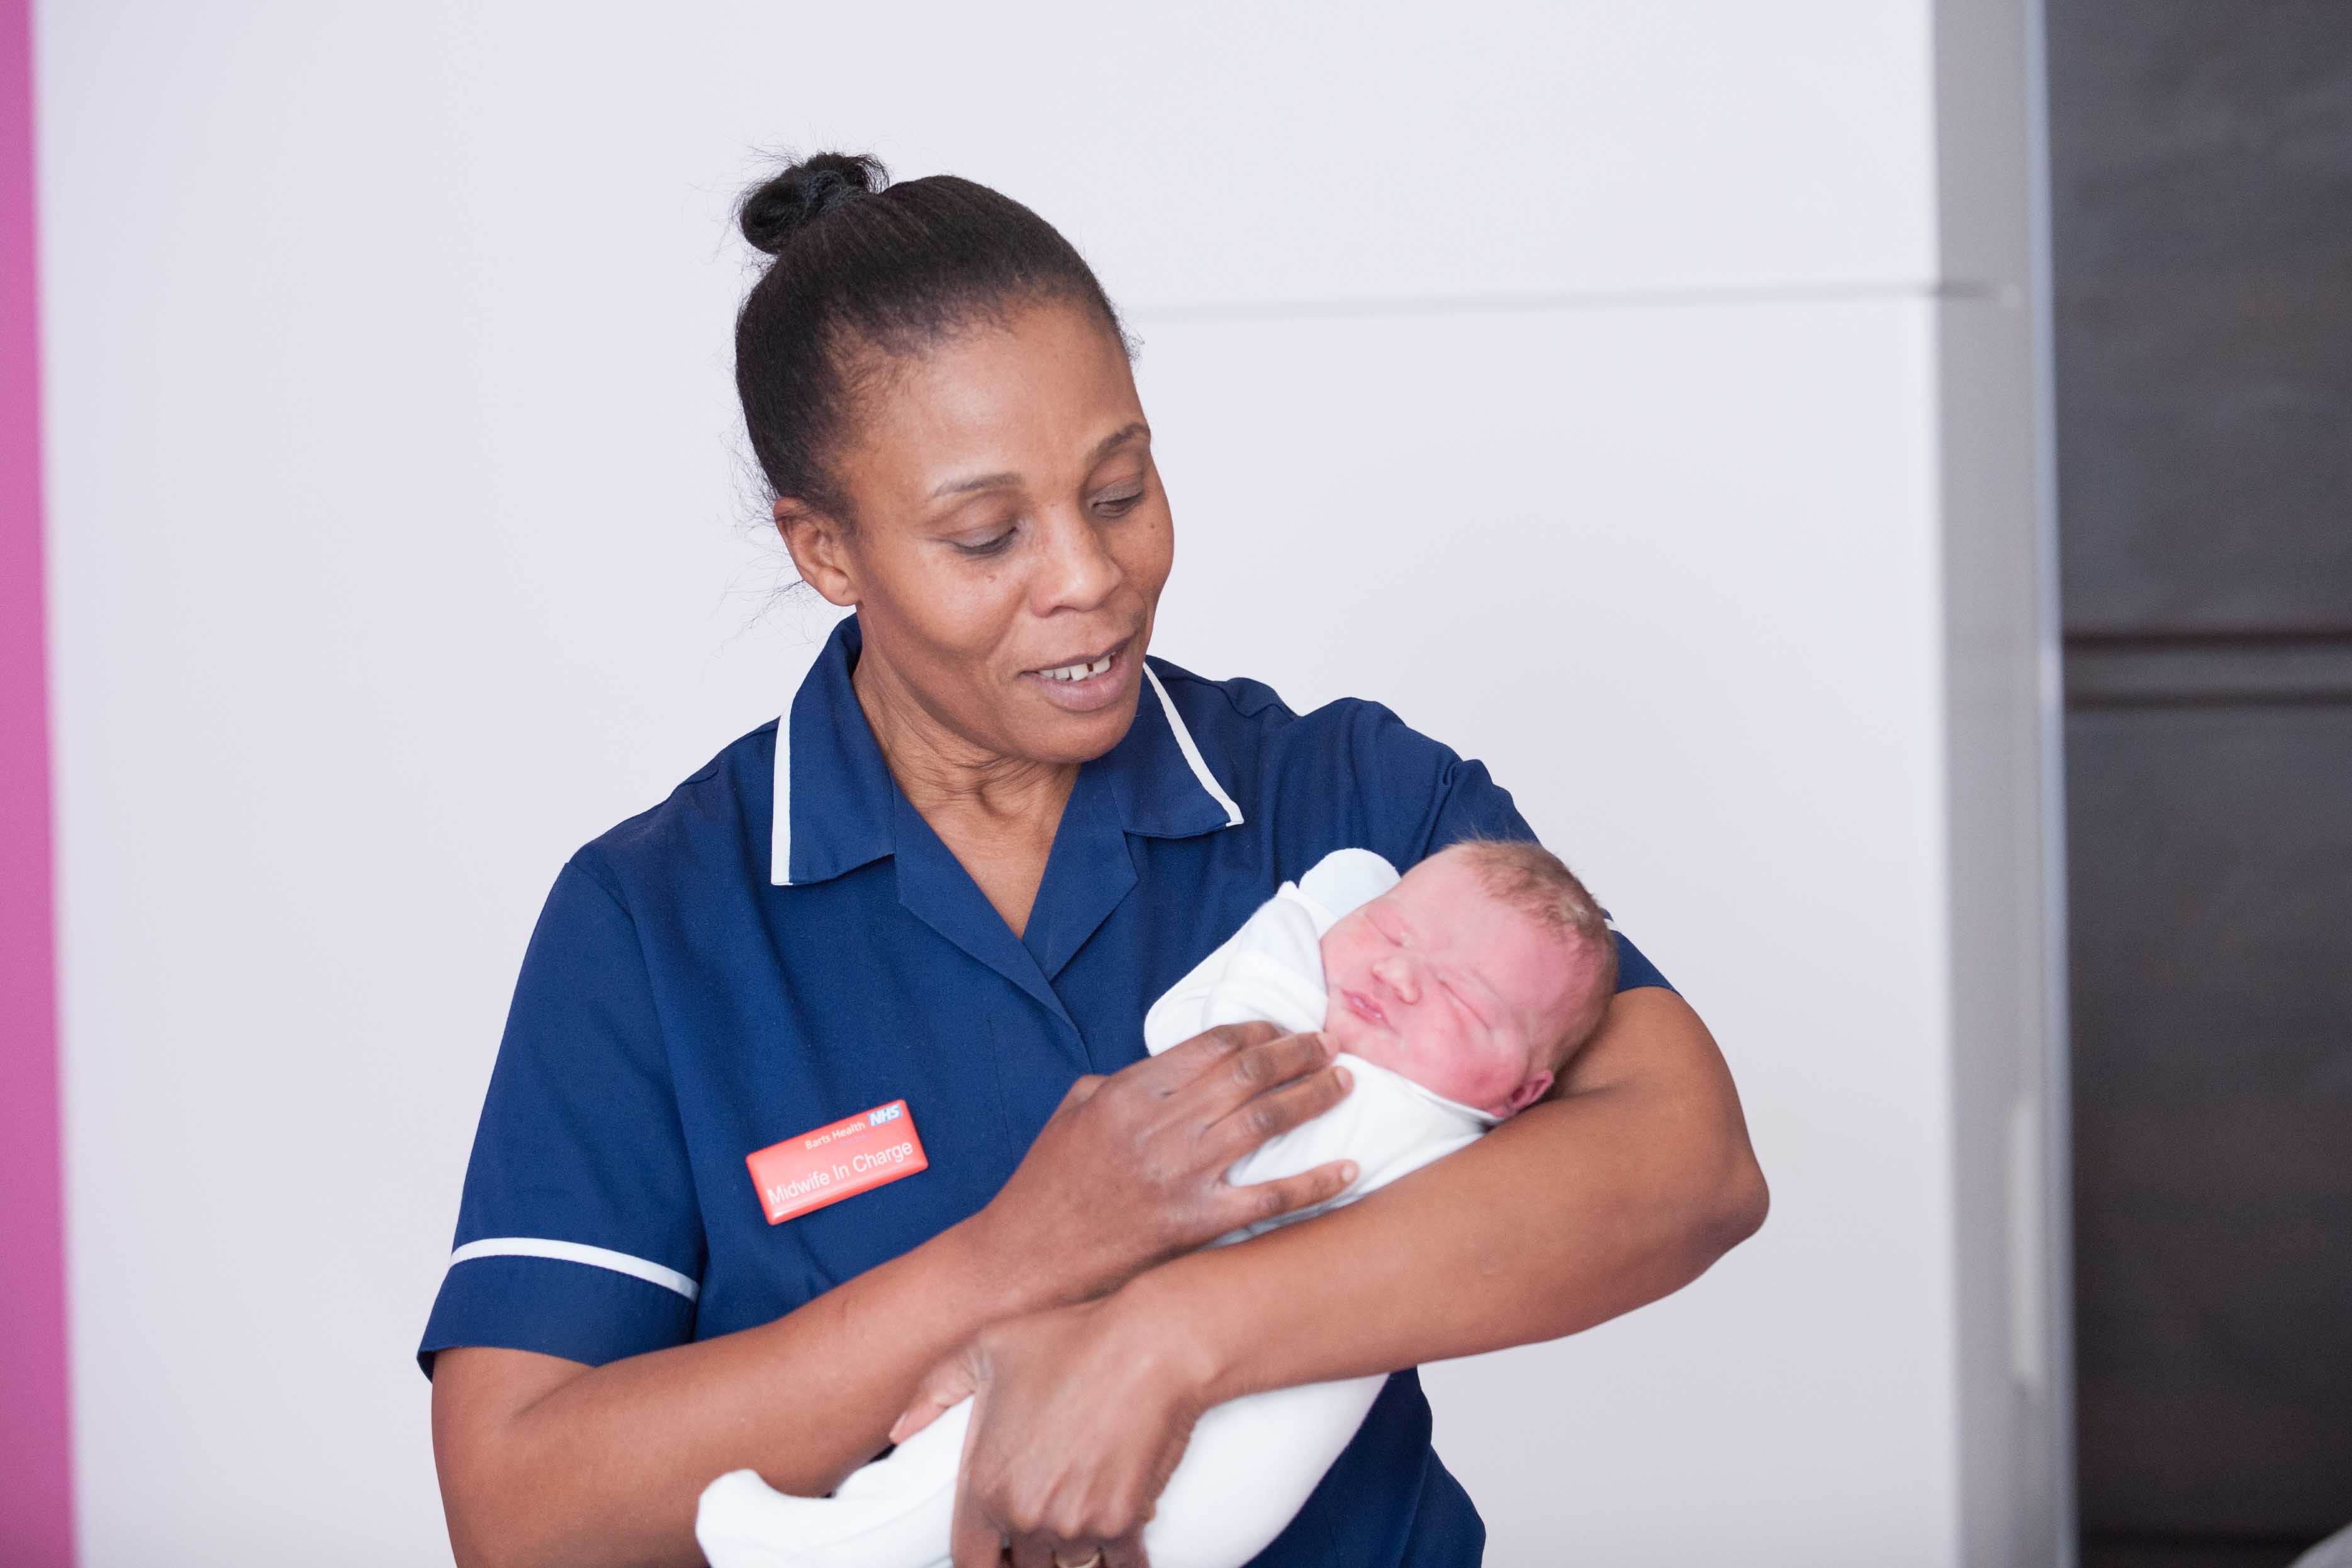 Having your baby at Barking Birth Centre